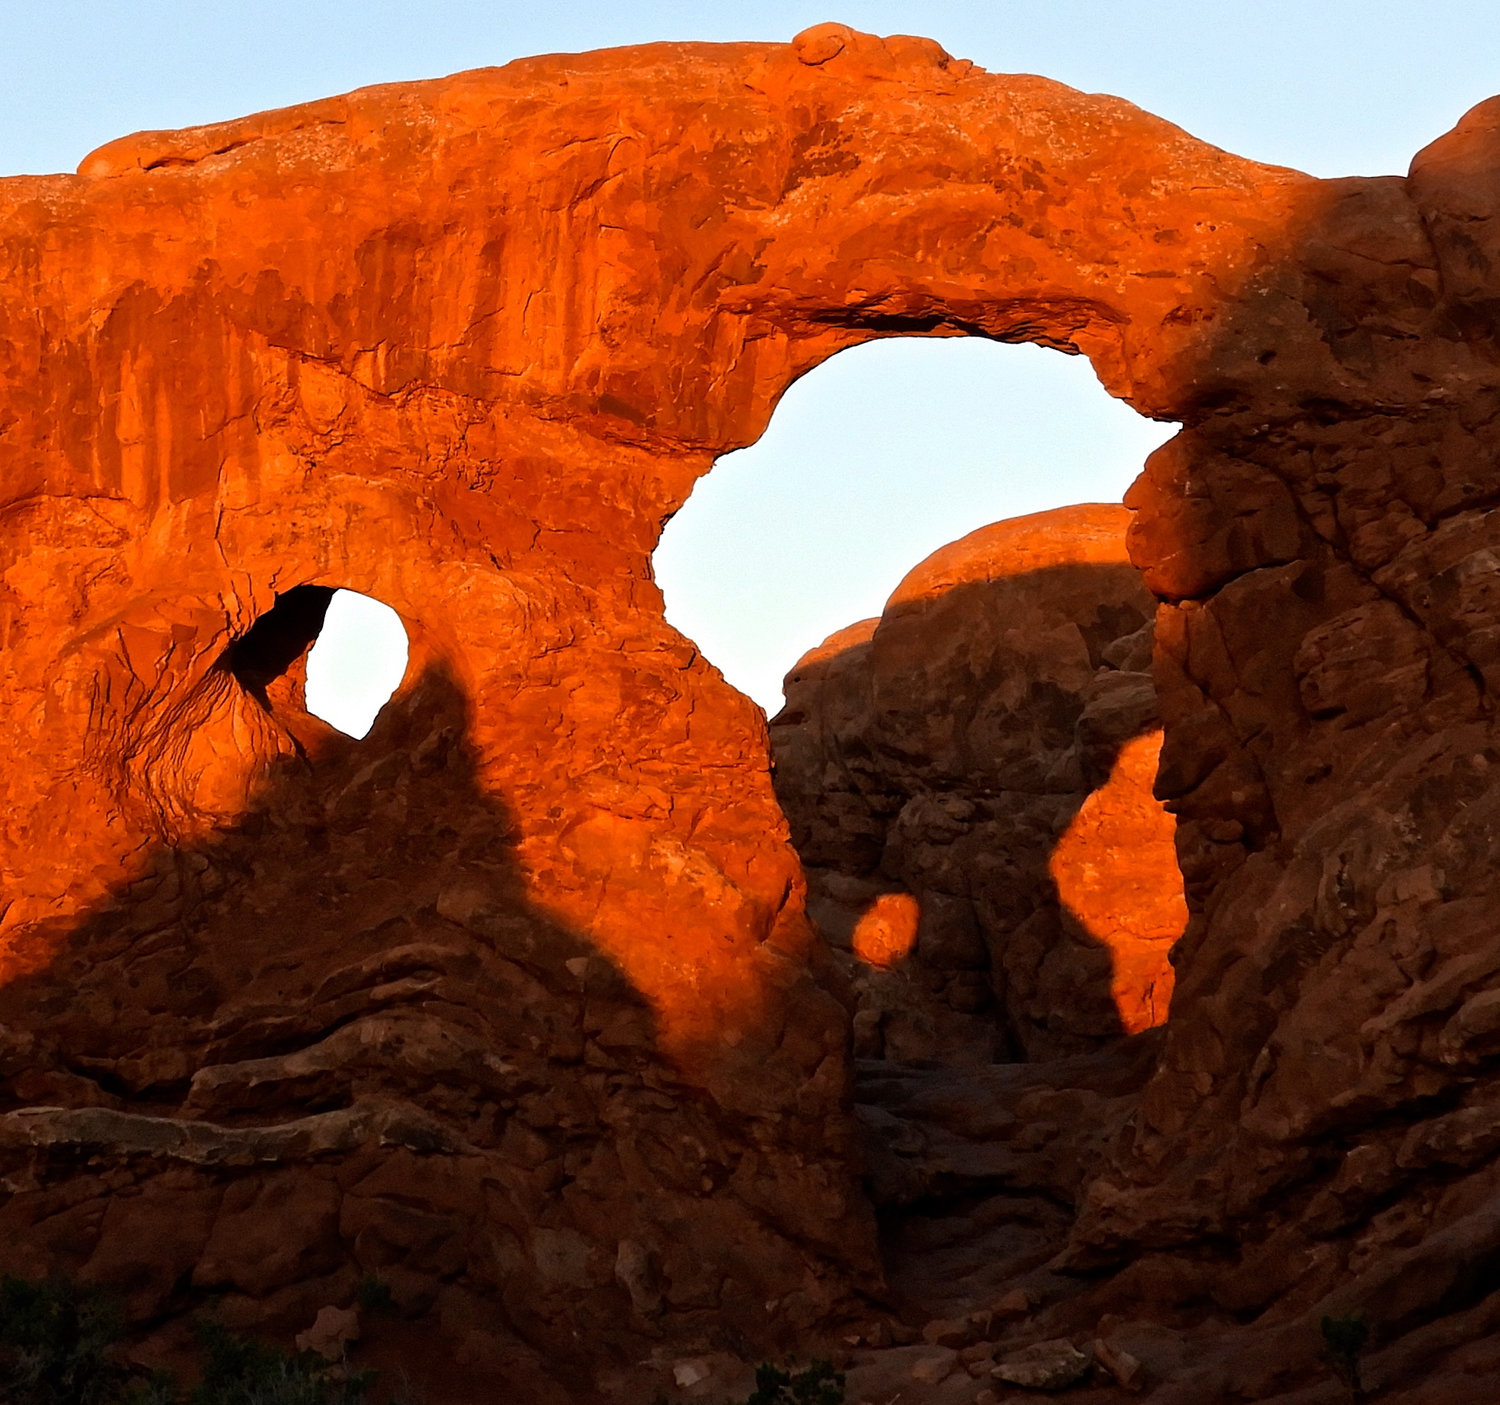 “Layered Arches, Sunrise” is one of David D. Sorensen featured in “The Art of Quarantine” exhibition at the Gallery with A Cause, part of the New Mexico Cancer Center in Albuquerque, Feb. 22-May 21.